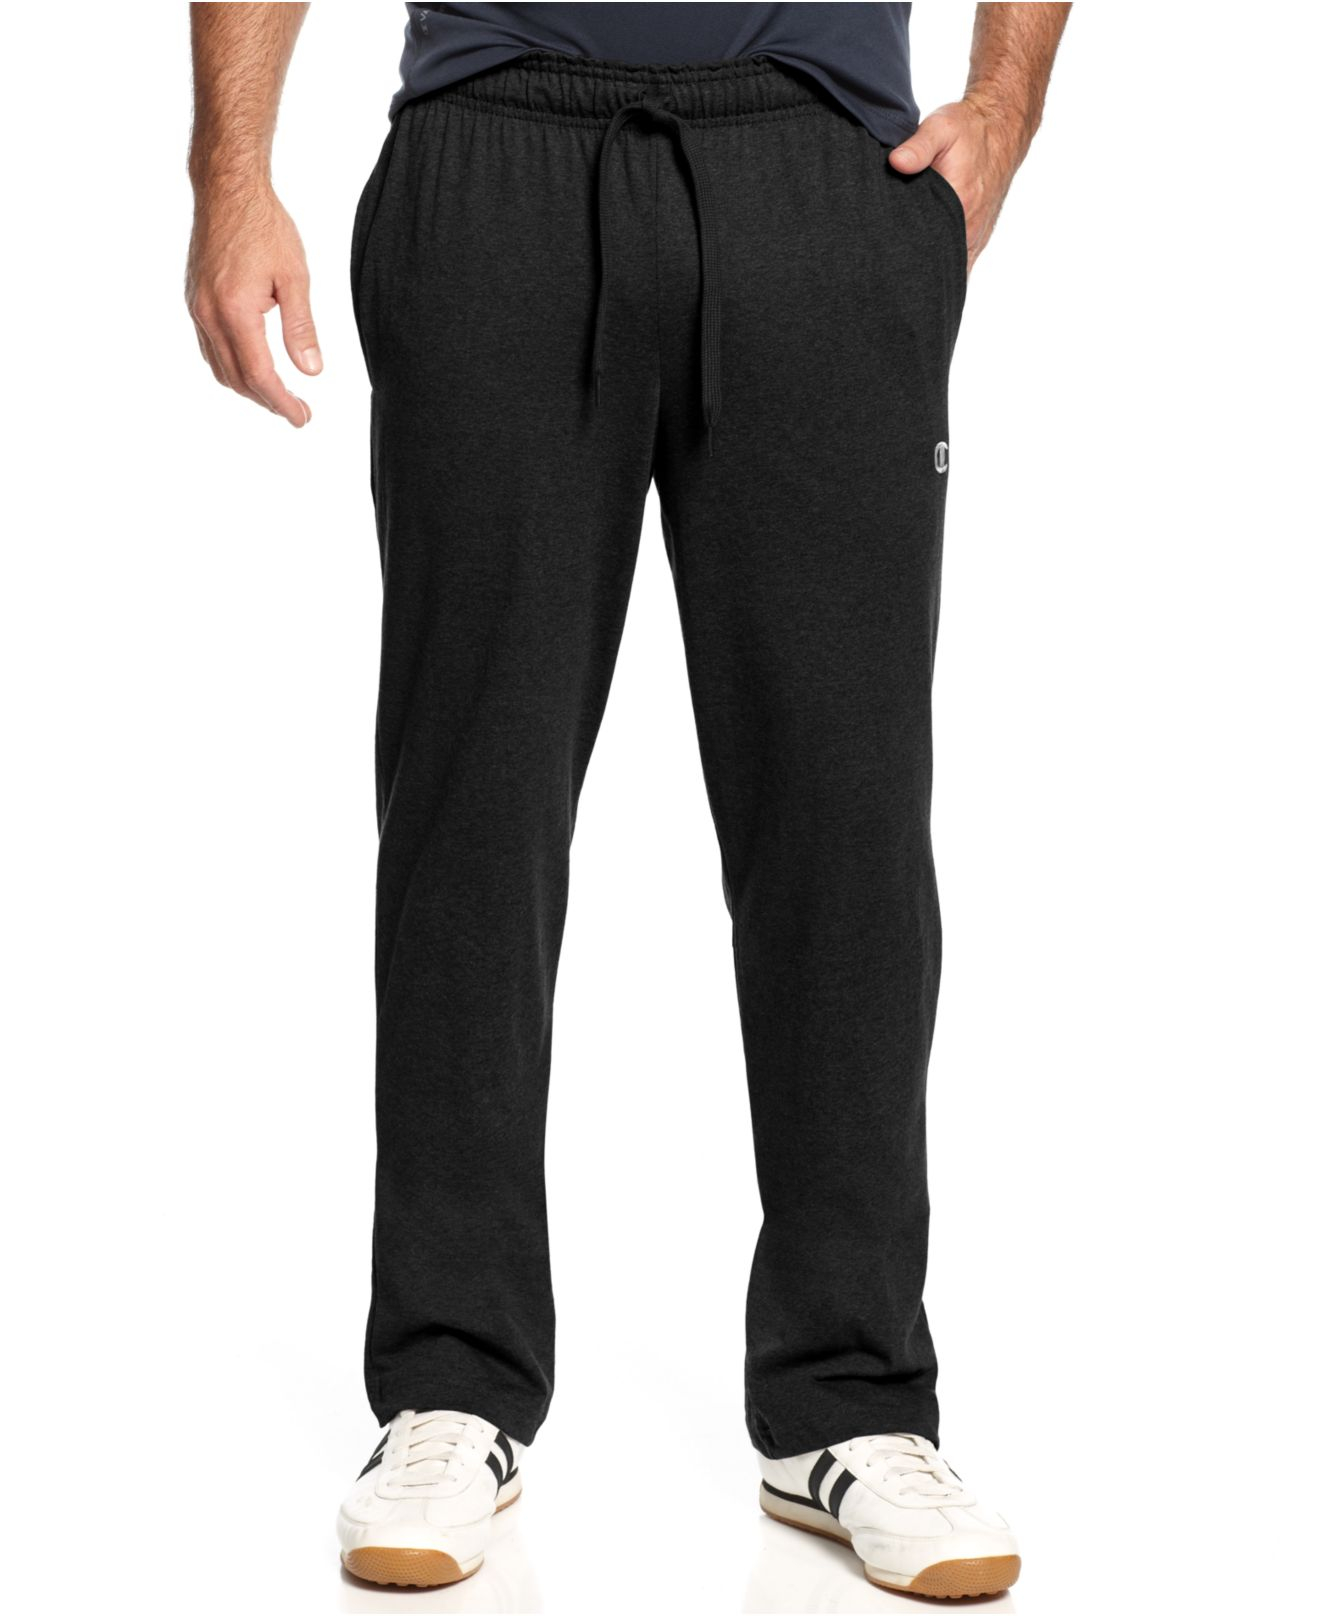 Lyst - Champion Jersey Active Pants in Black for Men